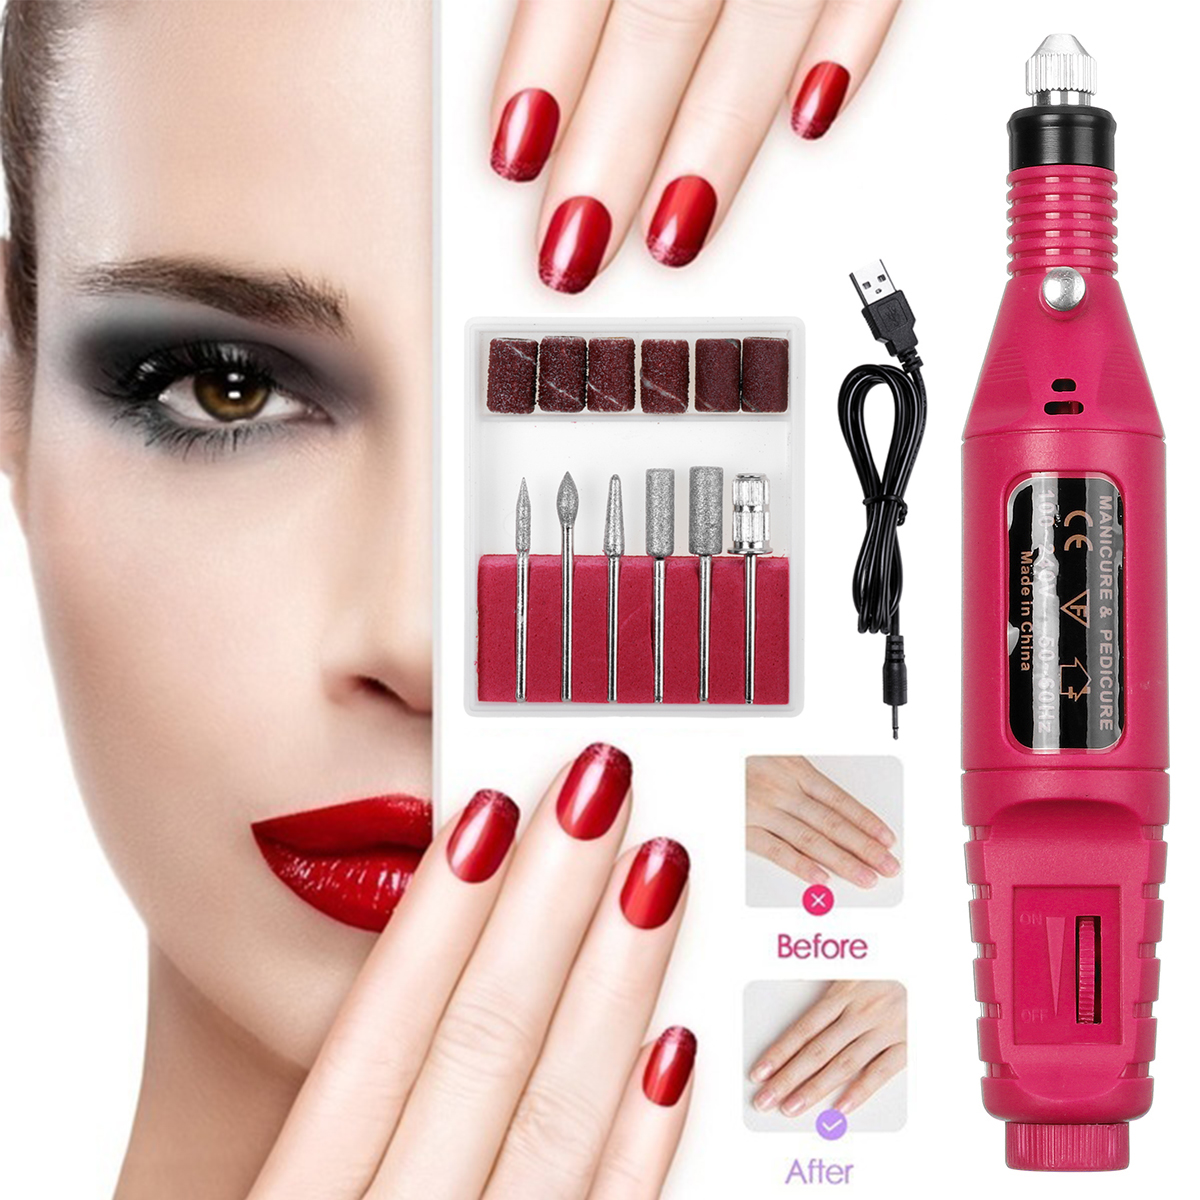 0-20000RPM-6-Color-USB-Charging-Electric-Nail-Grinder-Drill-Portable-Manicure-Pedicure-Nail-Machine--1764630-11